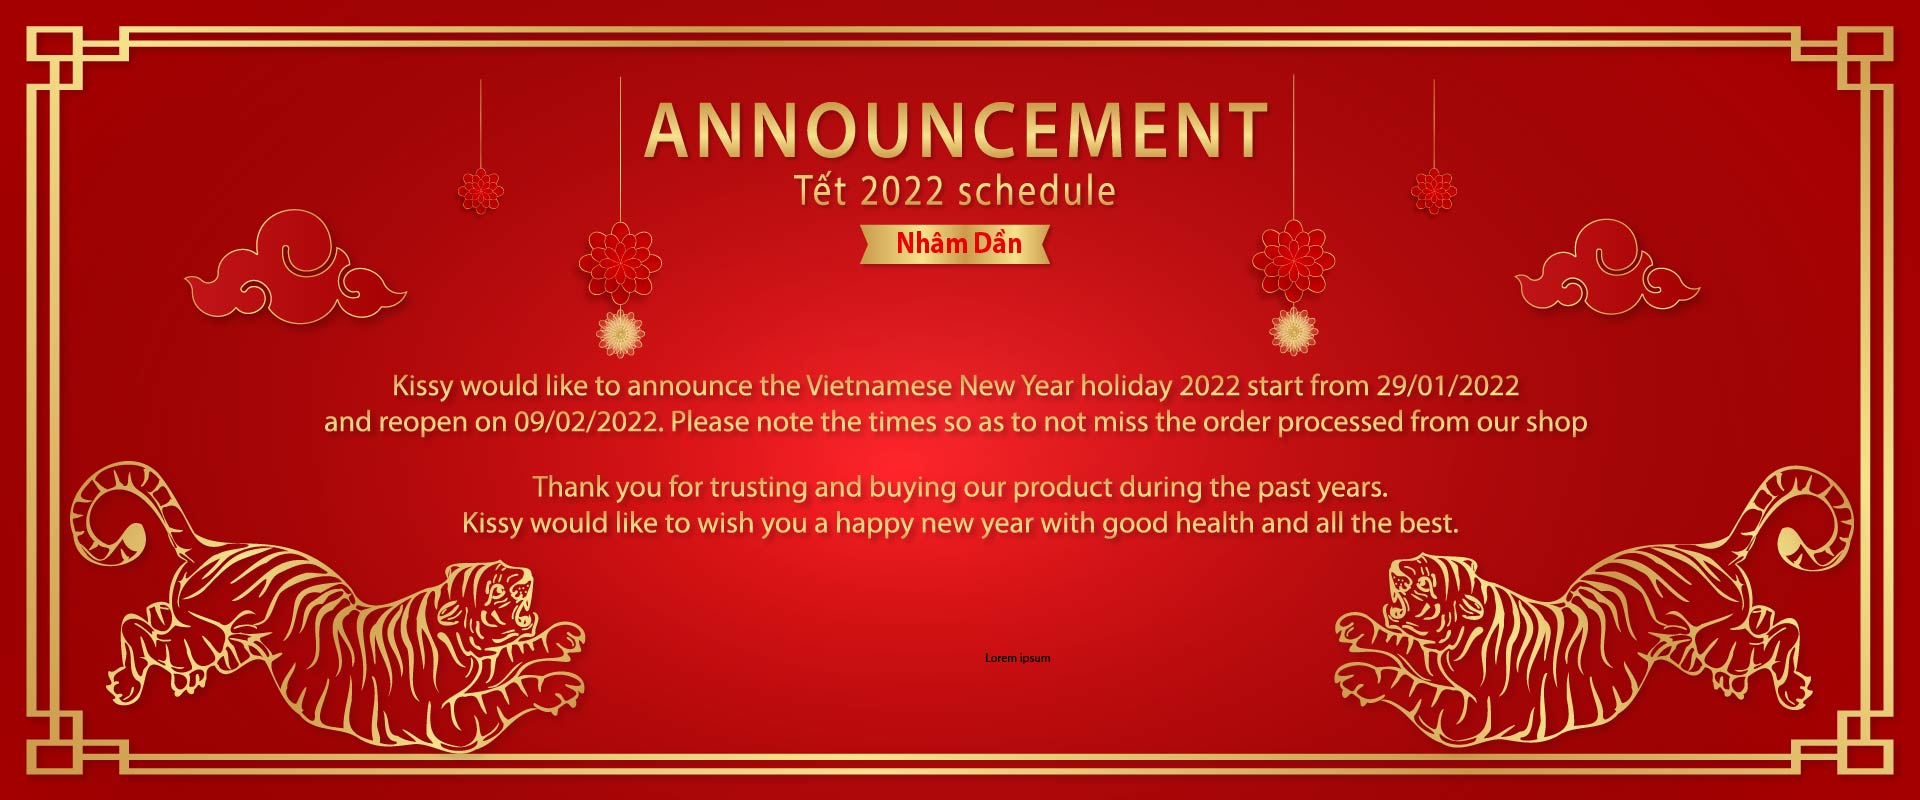 Conditions for returning home to celebrate Vietnamese New Year - Tết 2022 of all 63 provinces and cities